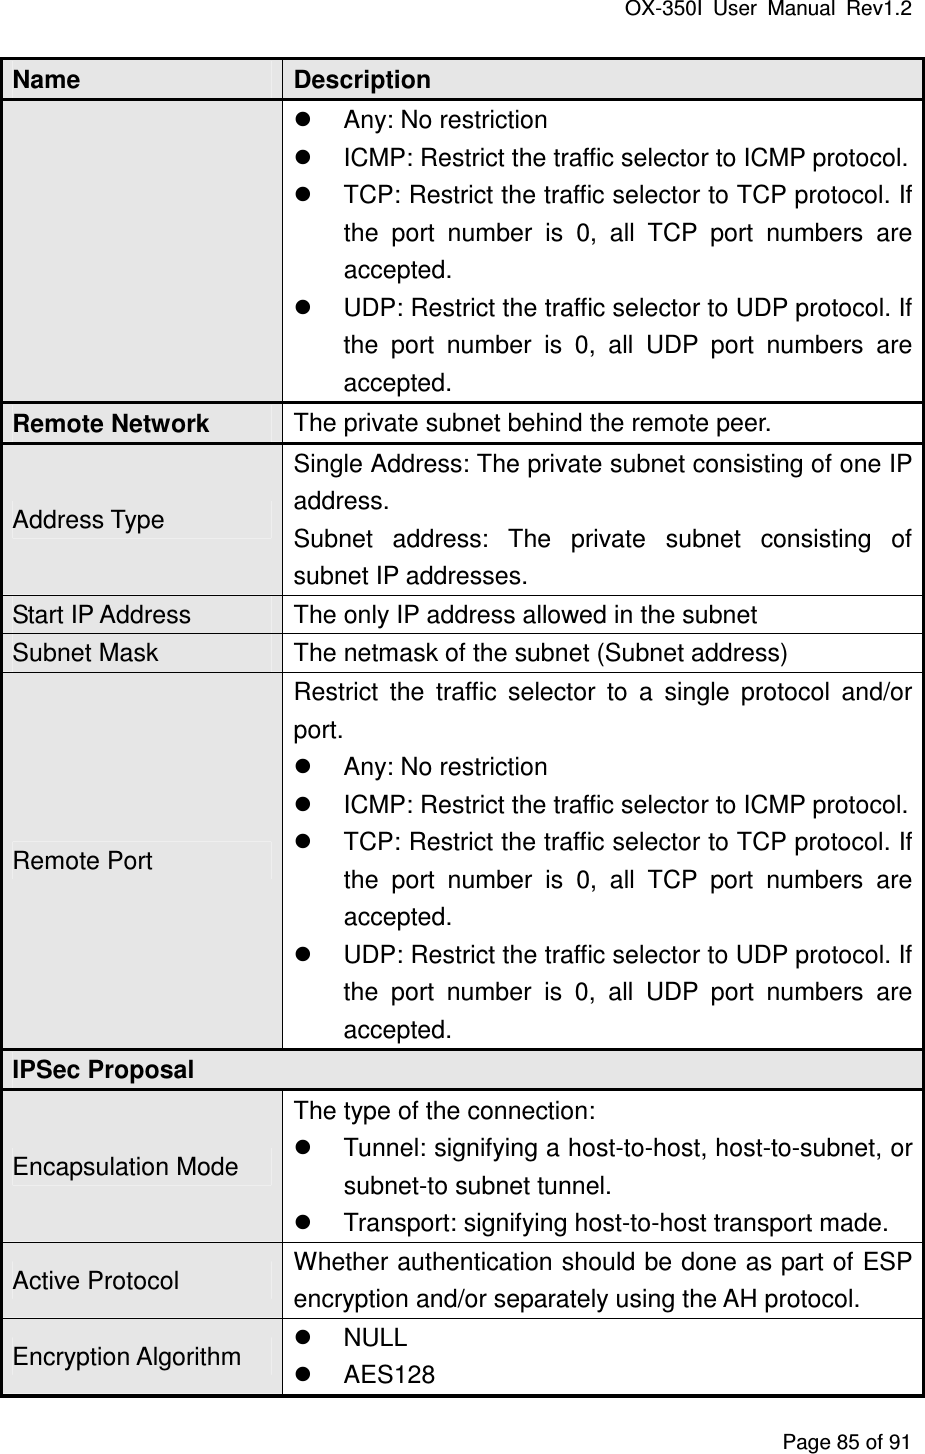 OX-350I  User  Manual  Rev1.2 Page 85 of 91 Name  Description   Any: No restriction   ICMP: Restrict the traffic selector to ICMP protocol.   TCP: Restrict the traffic selector to TCP protocol. If the  port  number  is  0,  all  TCP  port  numbers  are accepted.   UDP: Restrict the traffic selector to UDP protocol. If the  port  number  is  0,  all  UDP  port  numbers  are accepted. Remote Network  The private subnet behind the remote peer. Address Type Single Address: The private subnet consisting of one IP address. Subnet  address:  The  private  subnet  consisting  of subnet IP addresses. Start IP Address  The only IP address allowed in the subnet Subnet Mask  The netmask of the subnet (Subnet address) Remote Port Restrict  the  traffic  selector  to  a  single  protocol  and/or port.   Any: No restriction   ICMP: Restrict the traffic selector to ICMP protocol.   TCP: Restrict the traffic selector to TCP protocol. If the  port  number  is  0,  all  TCP  port  numbers  are accepted.   UDP: Restrict the traffic selector to UDP protocol. If the  port  number  is  0,  all  UDP  port  numbers  are accepted. IPSec Proposal Encapsulation Mode The type of the connection:   Tunnel: signifying a host-to-host, host-to-subnet, or subnet-to subnet tunnel.   Transport: signifying host-to-host transport made. Active Protocol  Whether authentication should be done as part of ESP encryption and/or separately using the AH protocol. Encryption Algorithm   NULL   AES128 